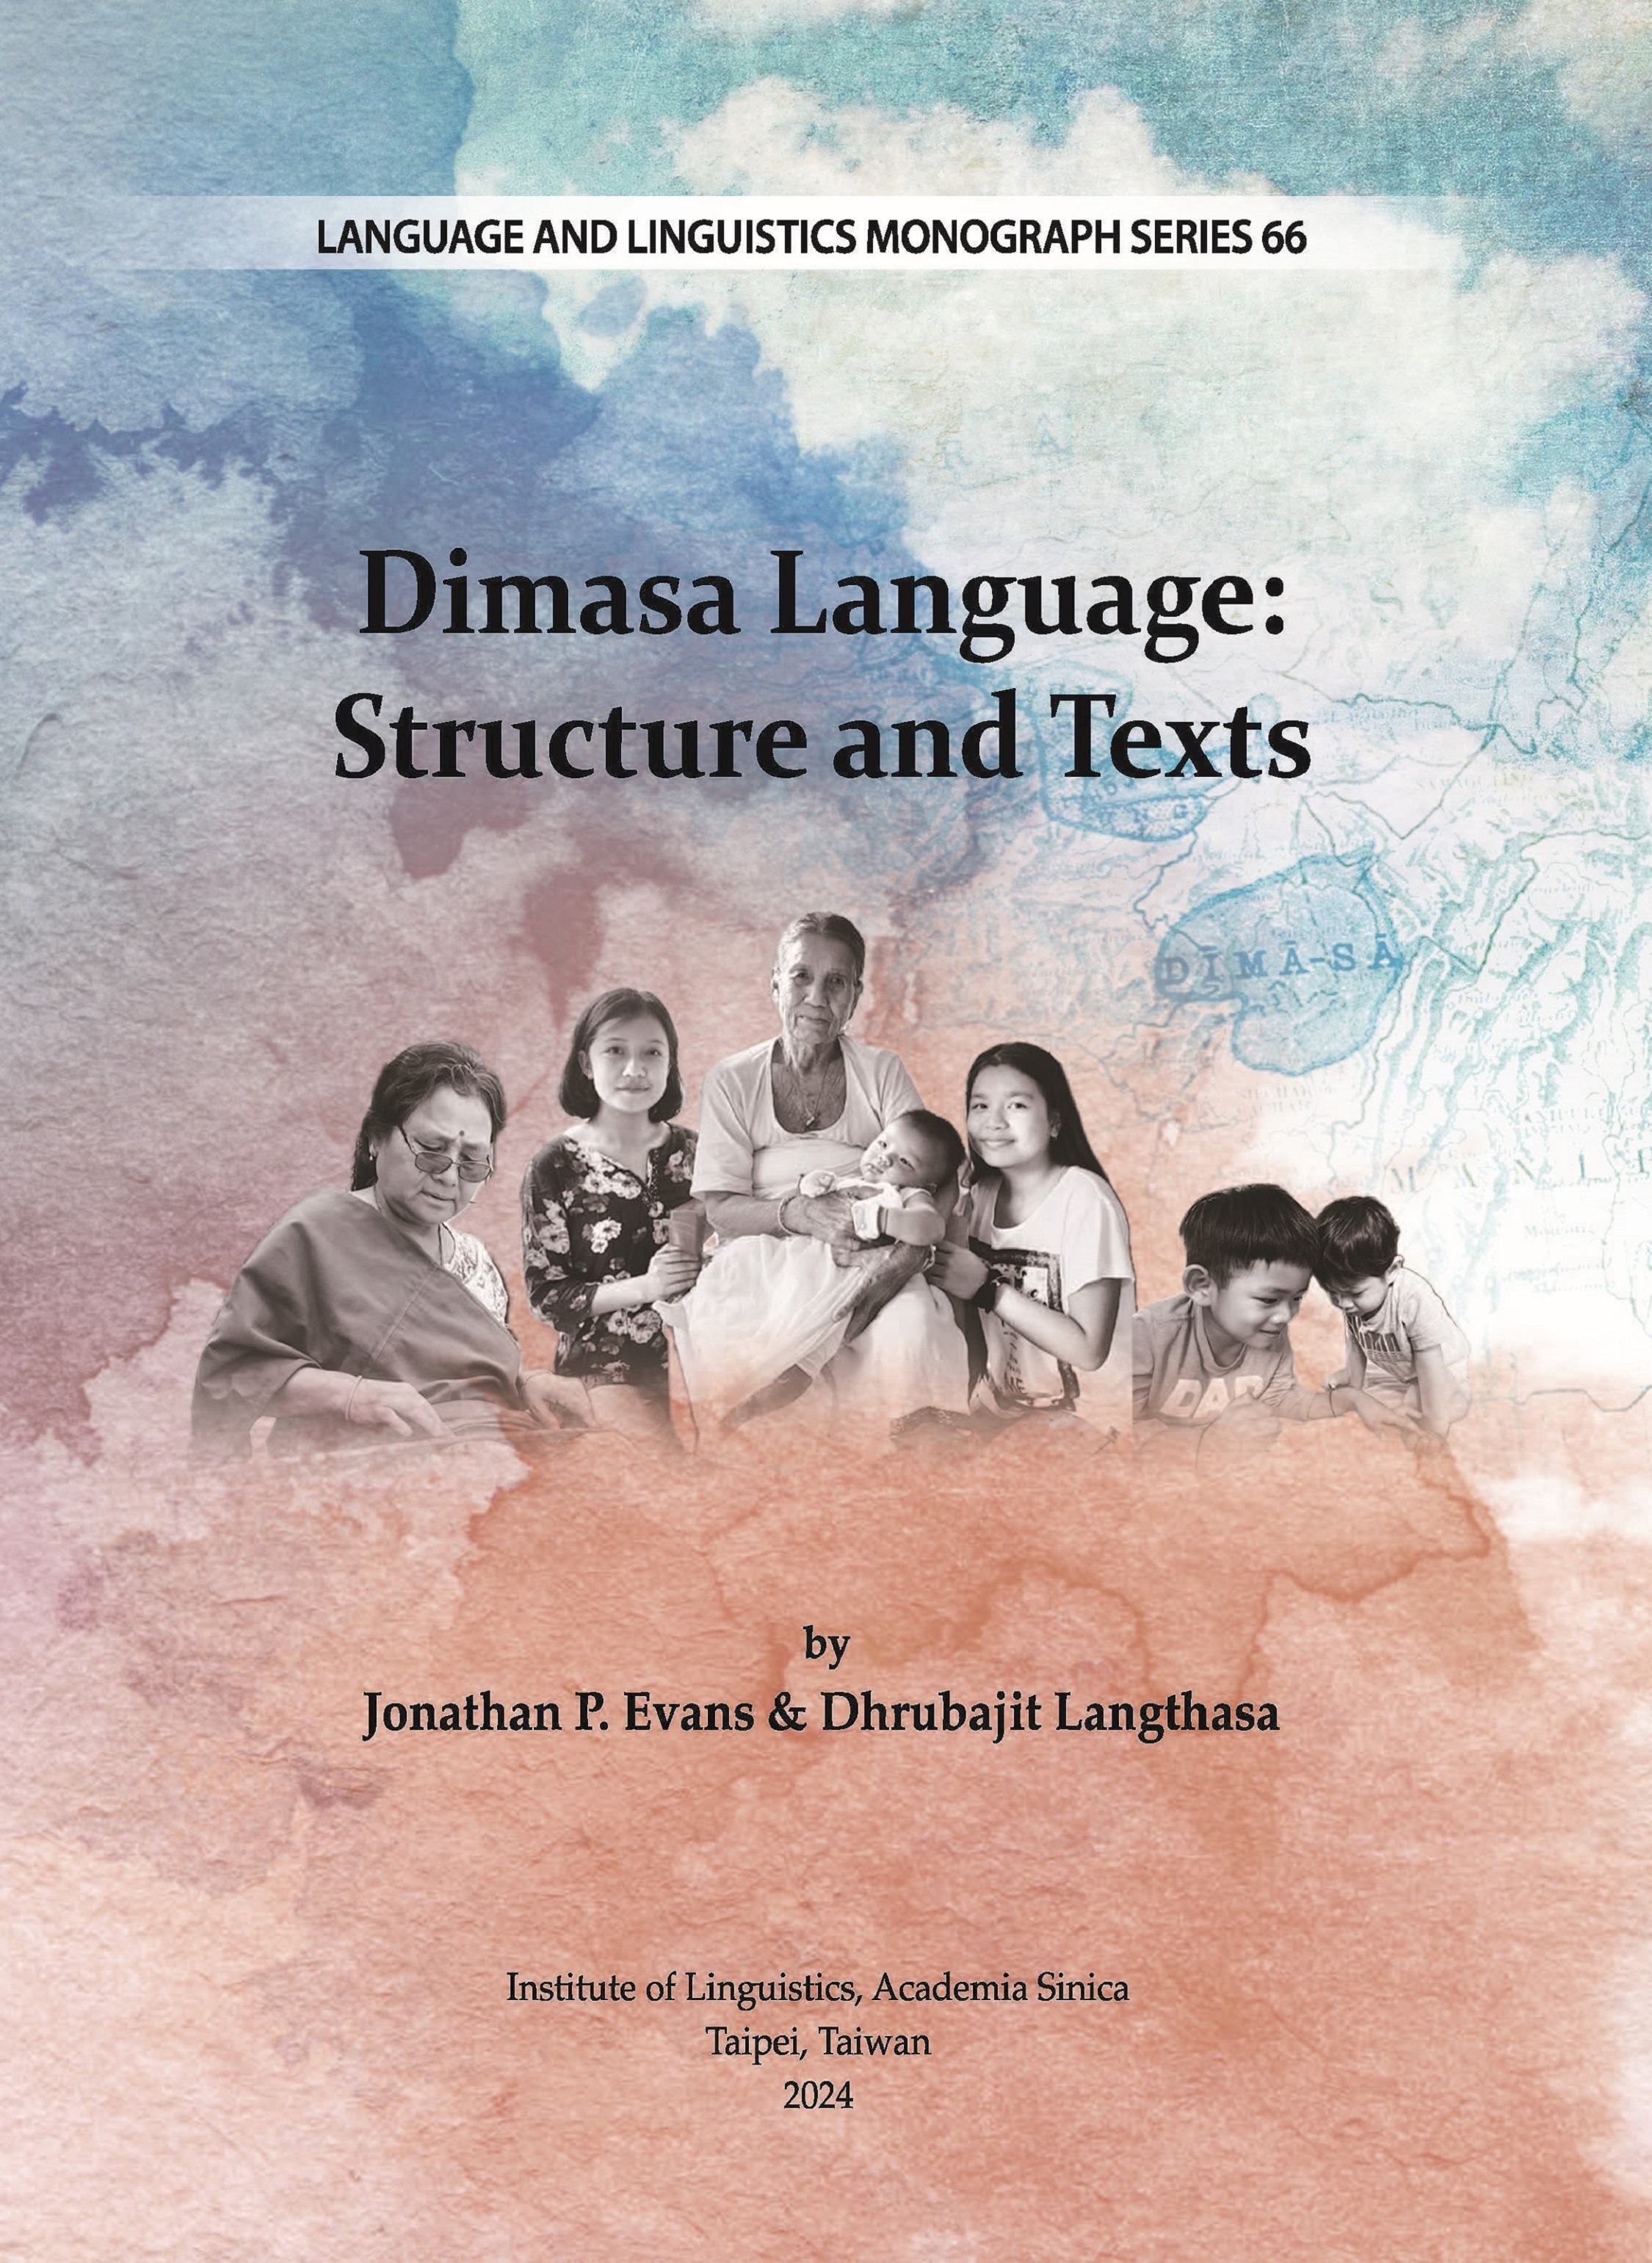 Dimasa Language: Structure and Texts